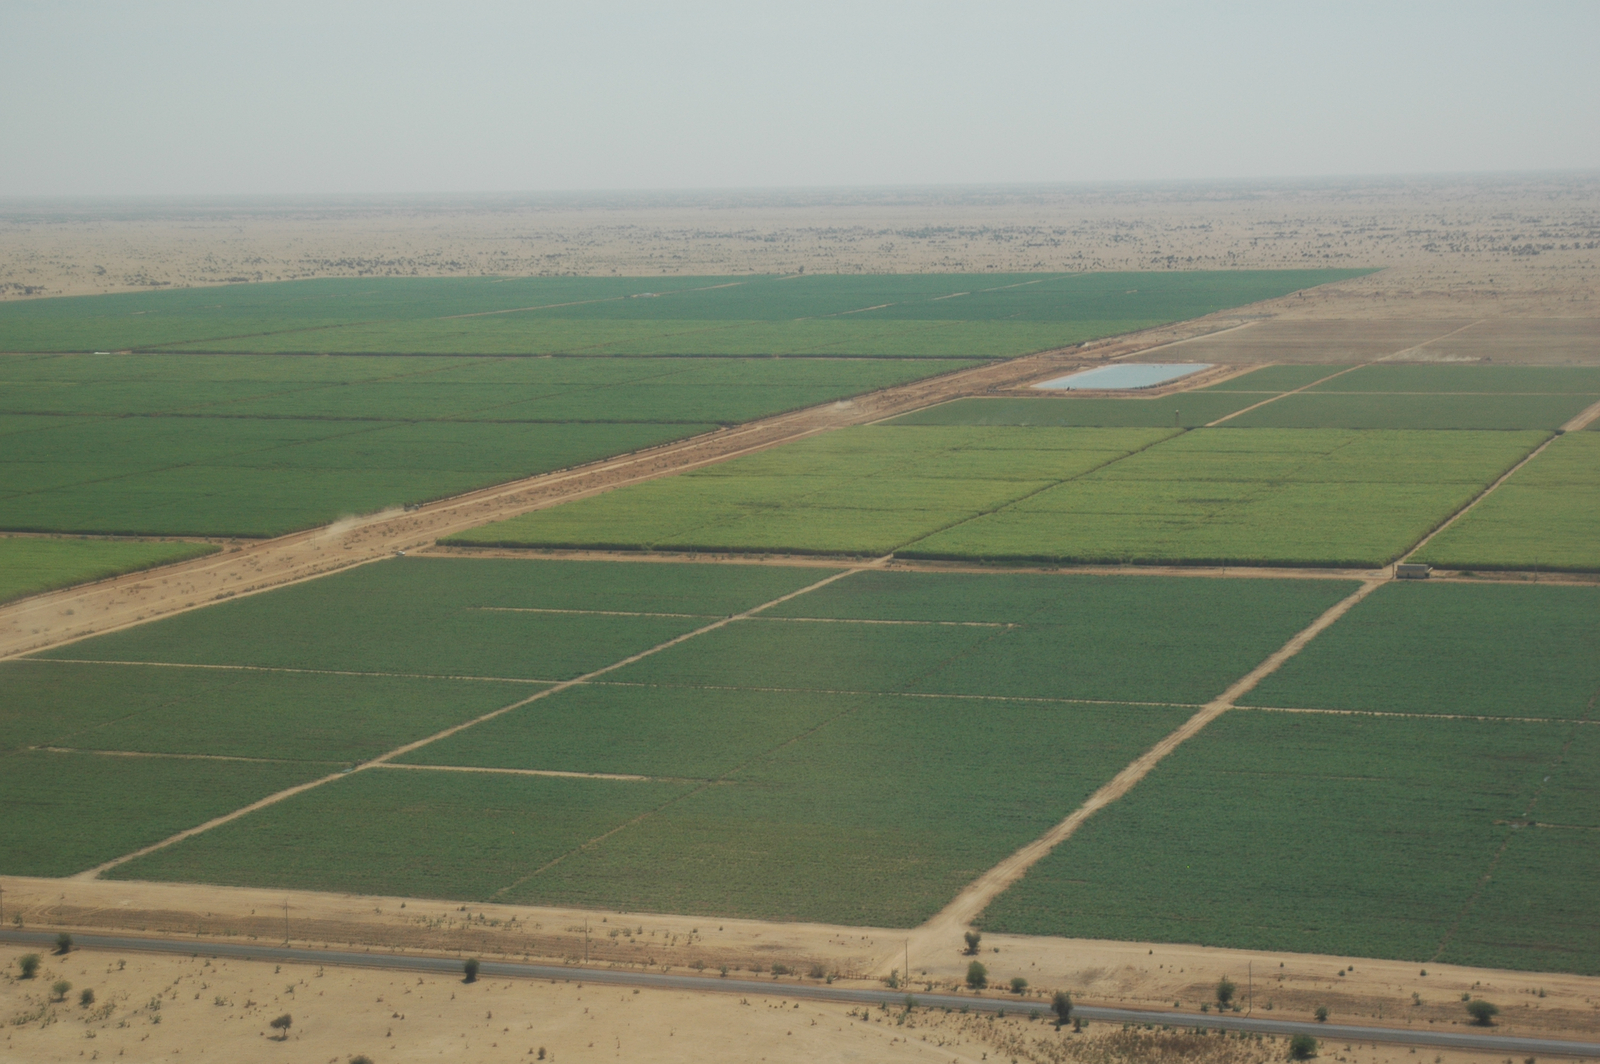 Large irrigation projects